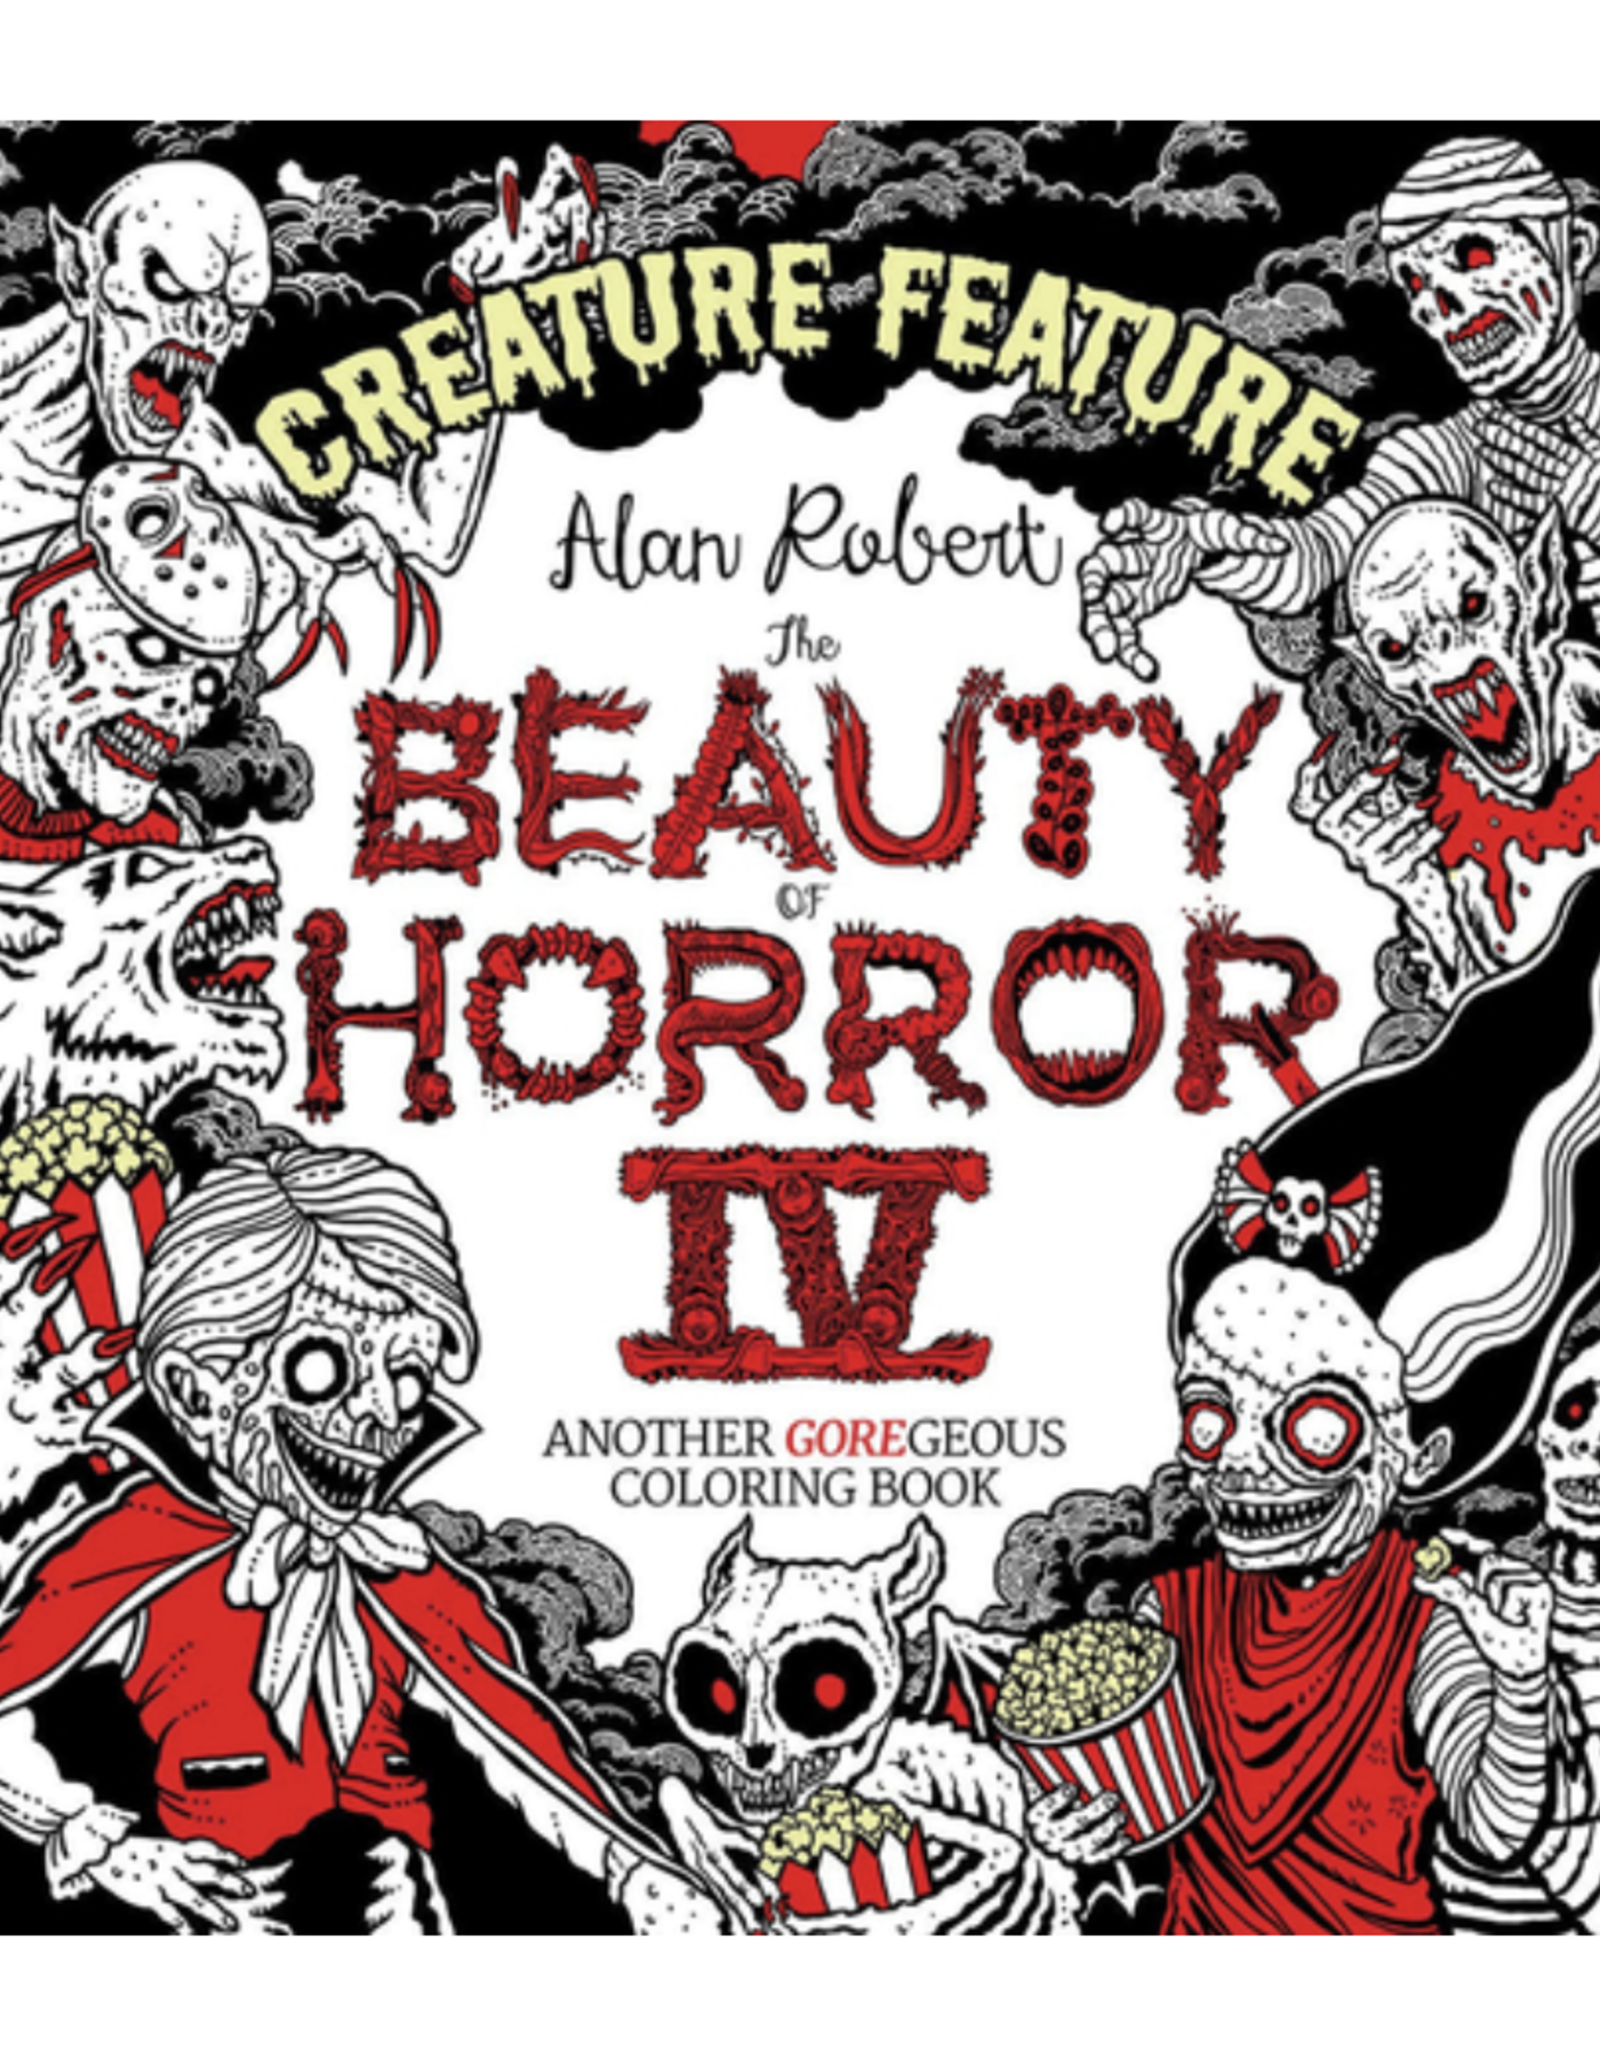 Beauty of Horror 4: Creature Feature Colouring Book by Alan Robert